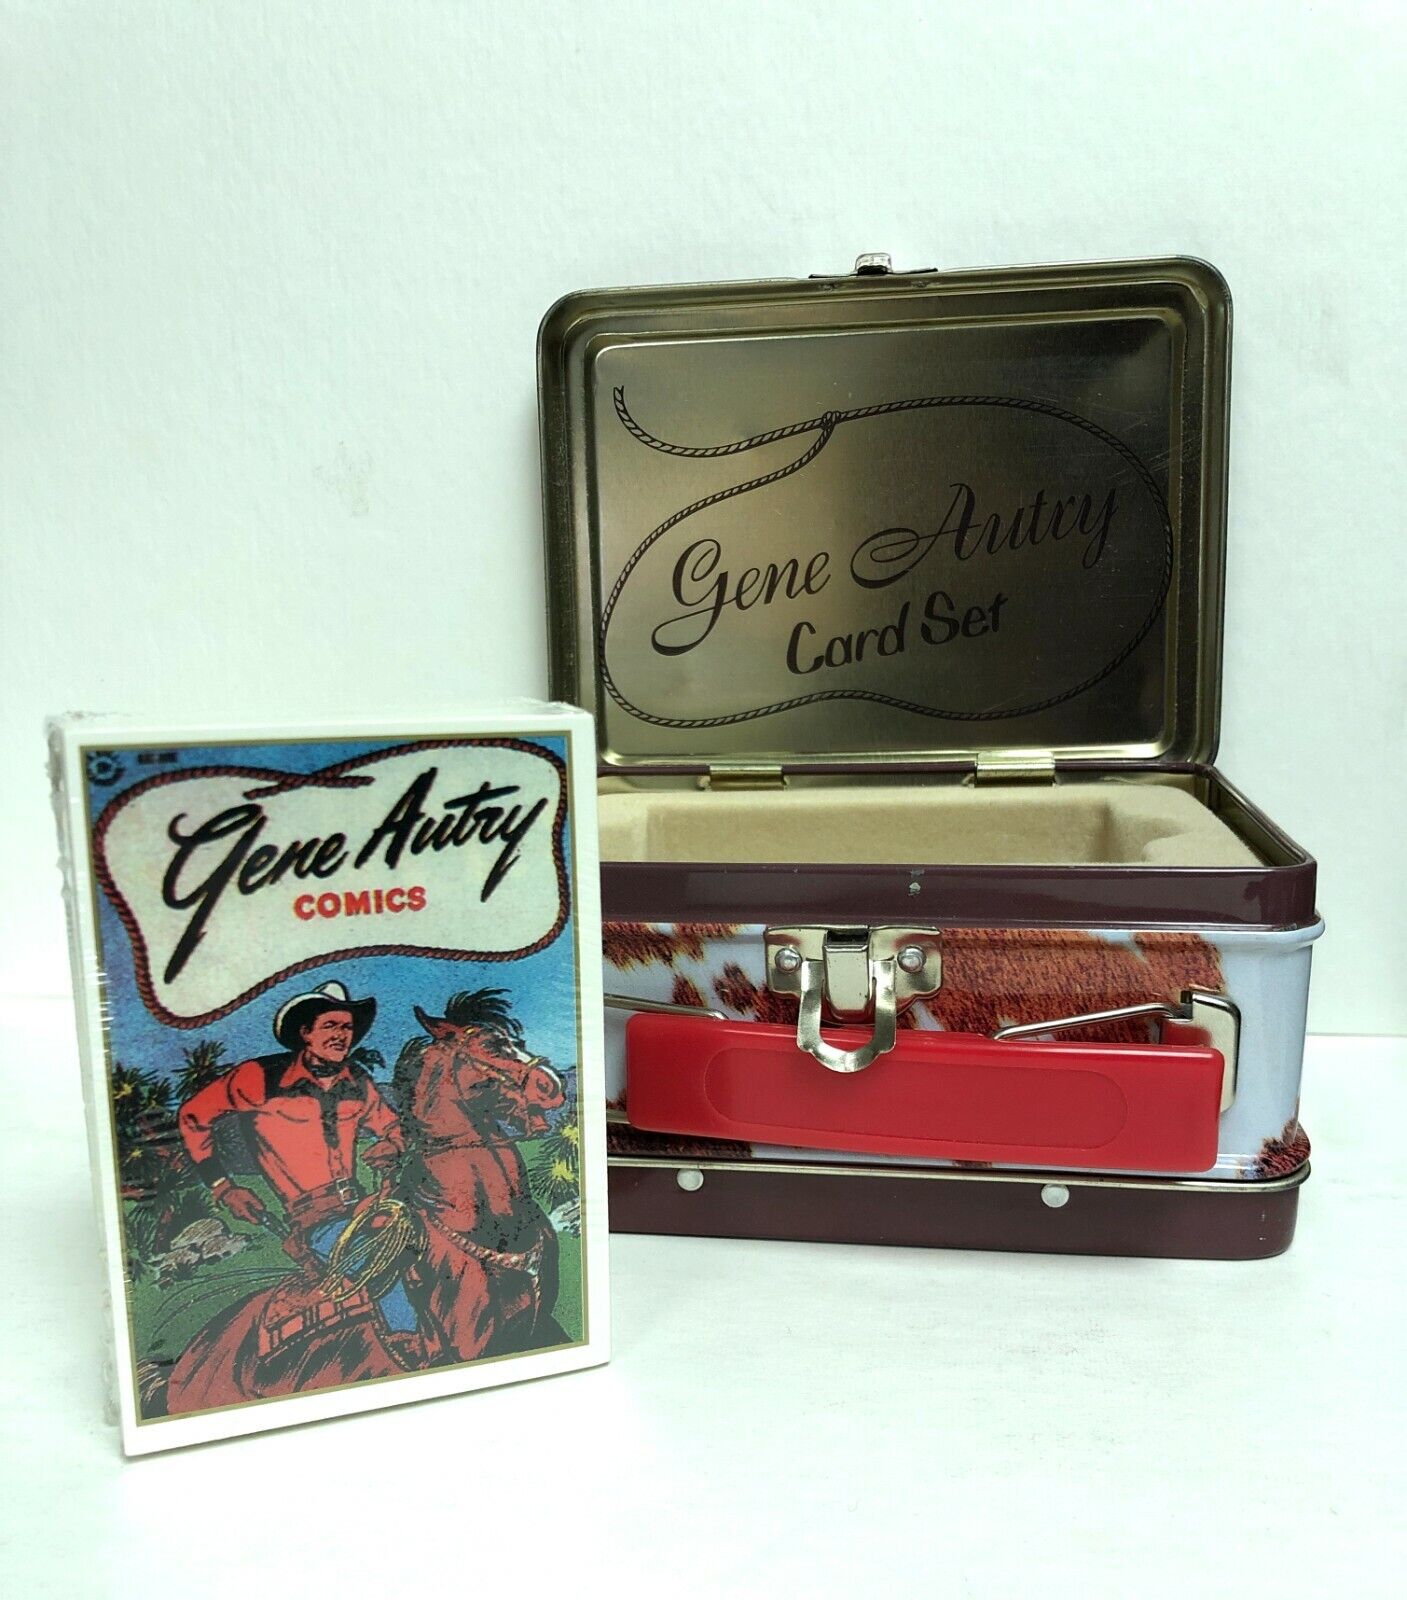 1995 Gene Autry Comic Card Set Series 1 With Mini Tin Lunchbox Sealed SMKW, Inc